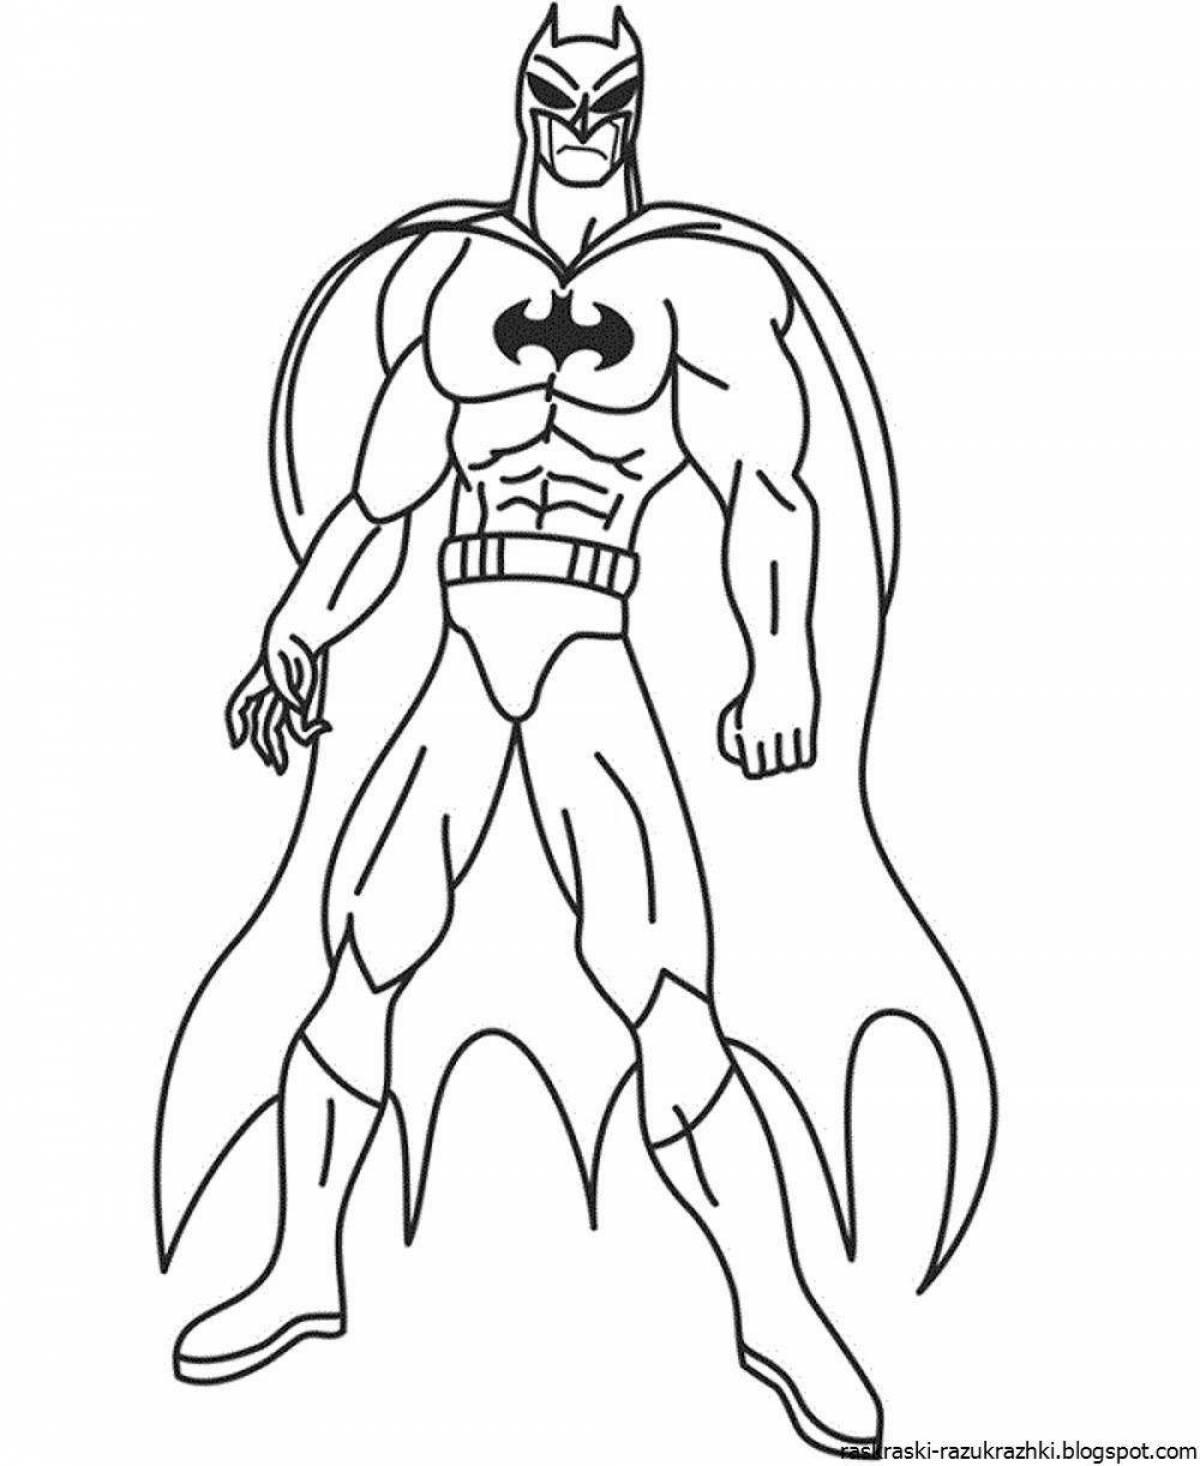 Amazing superhero coloring pages for 5-6 year olds